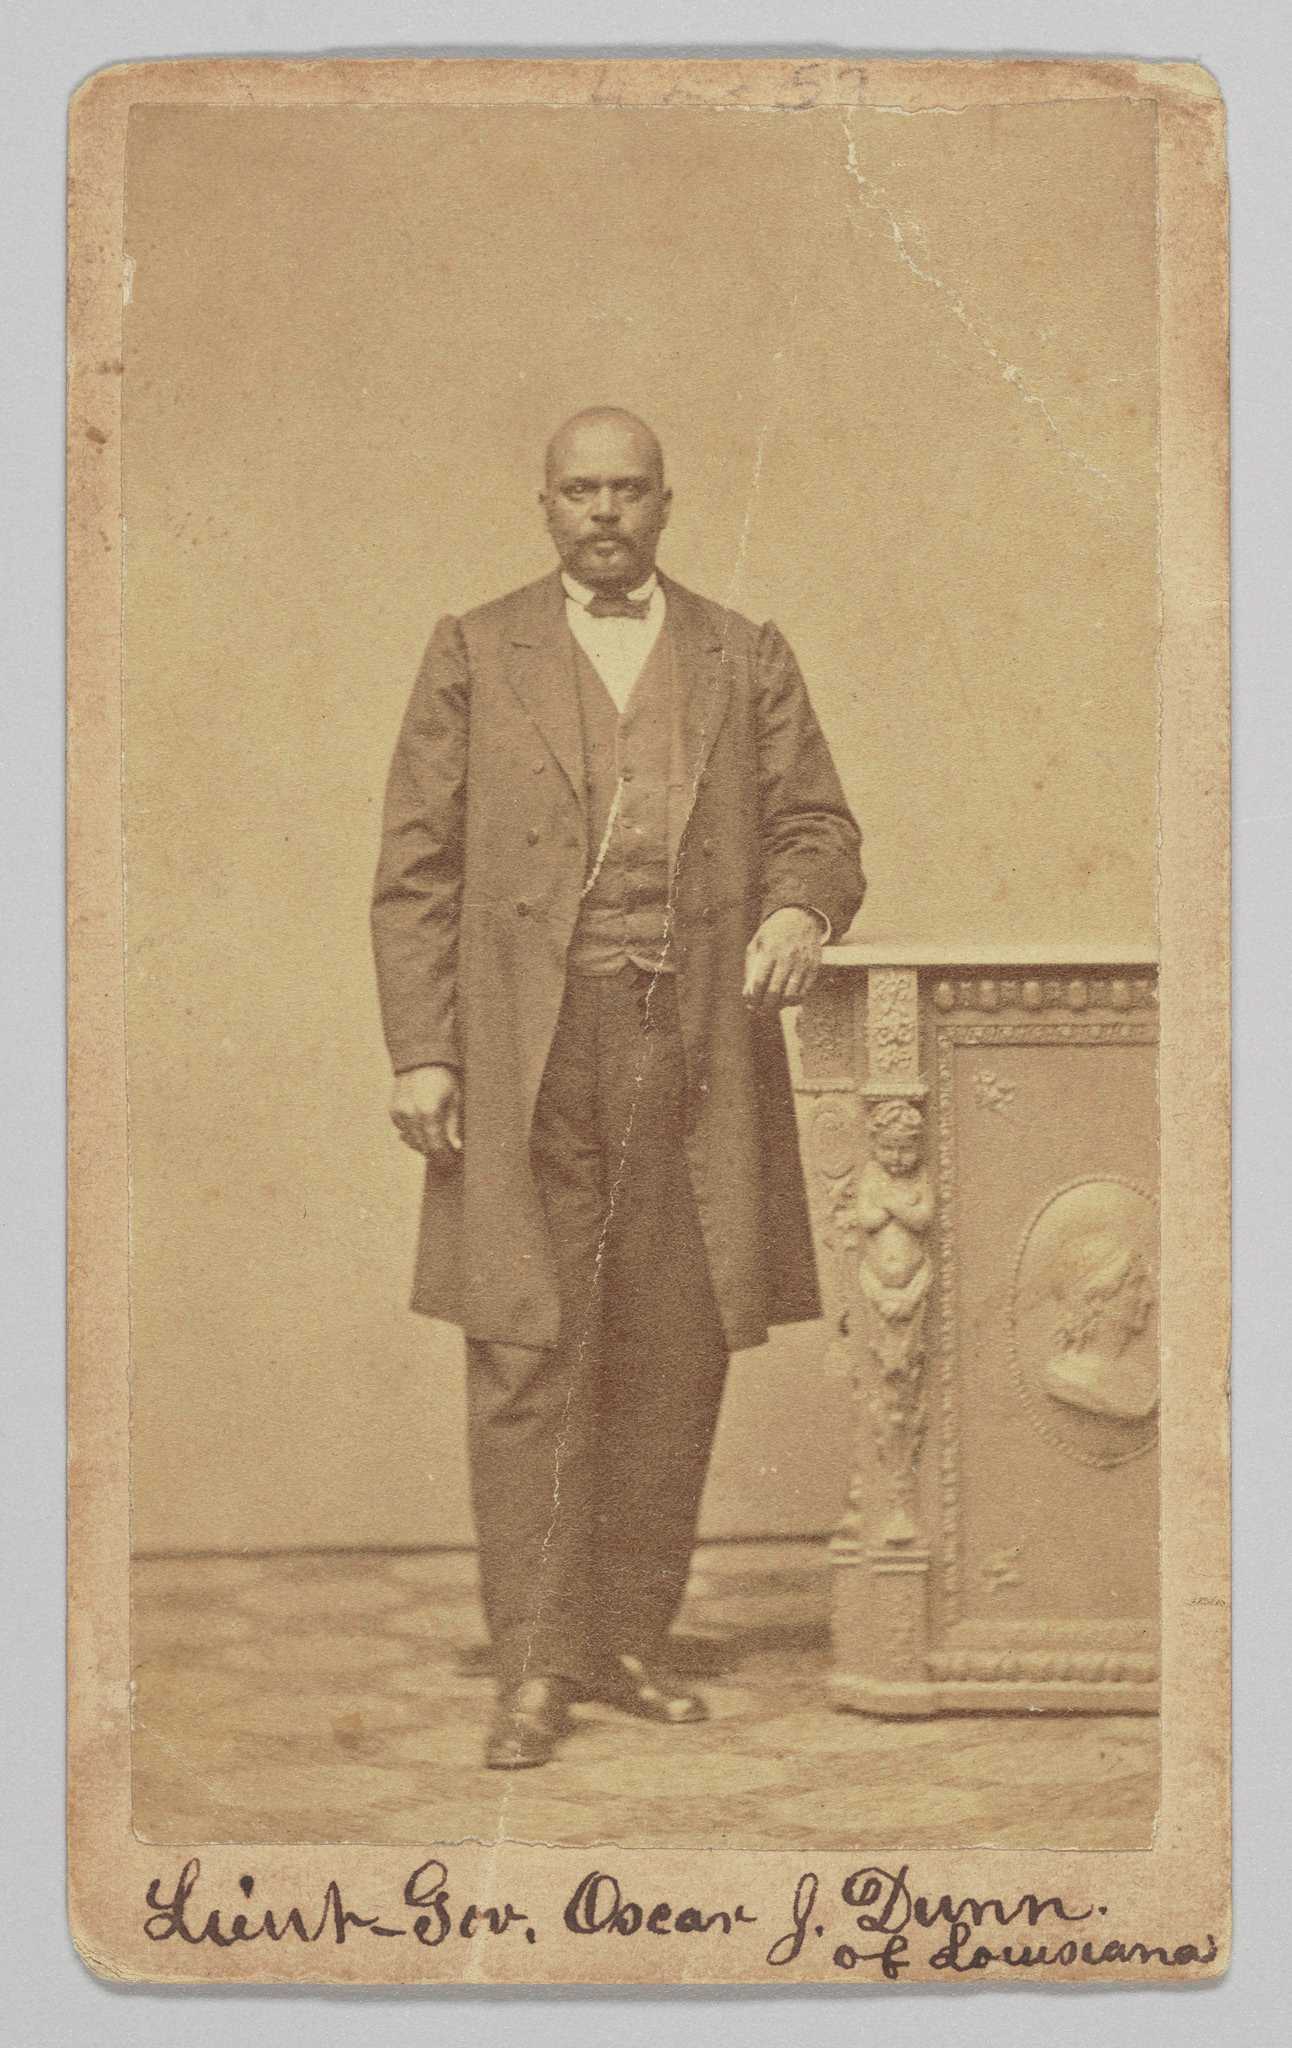 An albumen print carte-de-visite portrait of Lt. Governor Oscar J. Dunn. He is photographed standing with his right foot slightly forward than his left and has his left arm resting on a pedestal. He is wearing a dark colored suit, vest and a bowtie. A watch chain is visible on the right side of his vest. He is looking directly at the camera. The photograph is inscribed on at the top and bottom of the front. At the bottom, handwritten in black ink, is: [Lieut Gov. Oscar J. Dunn / of Louisiana].